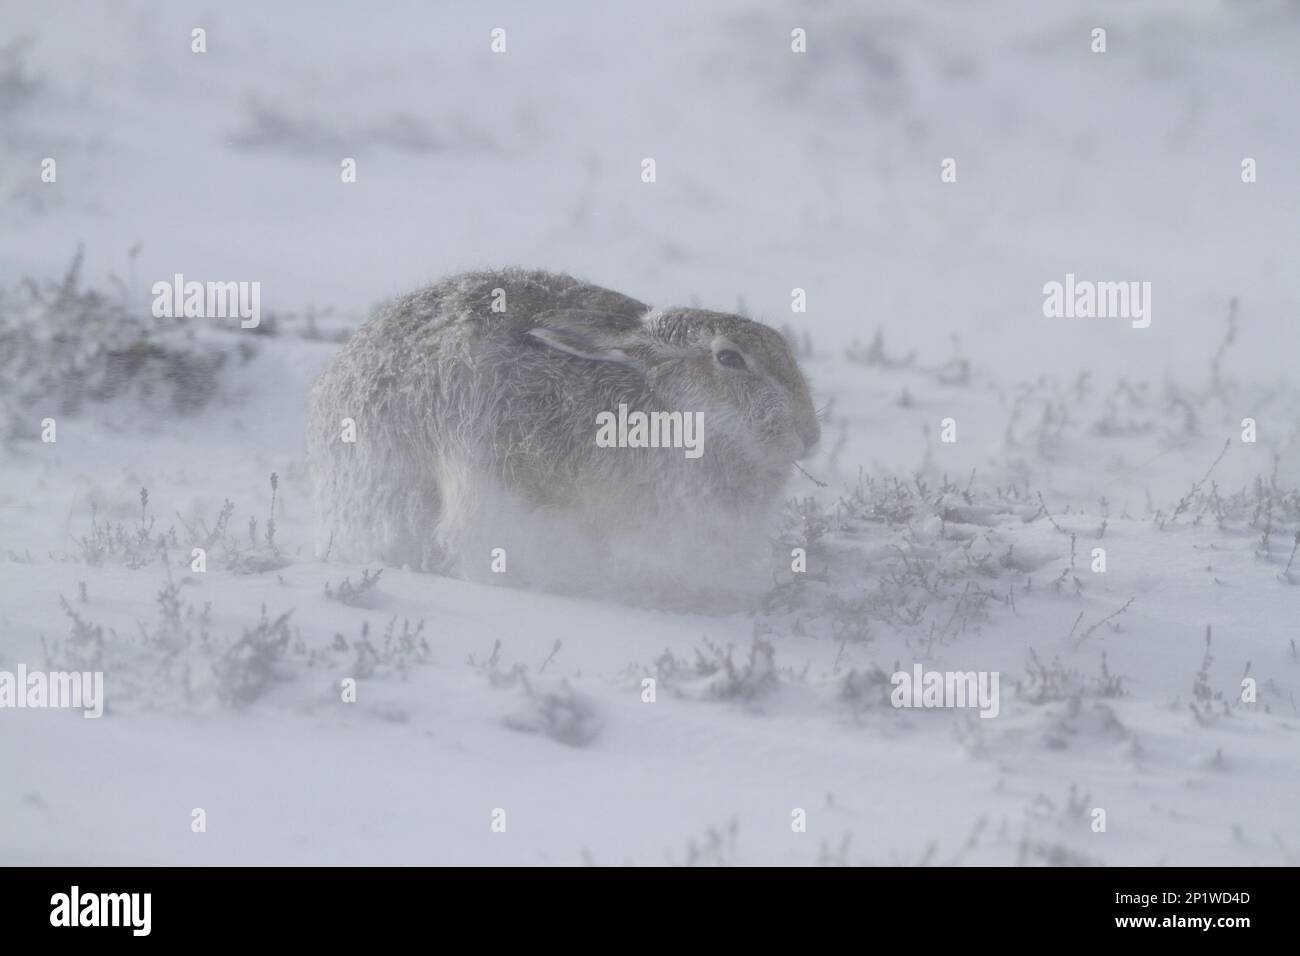 Mountain hare (Lepus timidus) Adult transitional coat, shelter in storm, Scotland, March 2015 Stock Photo